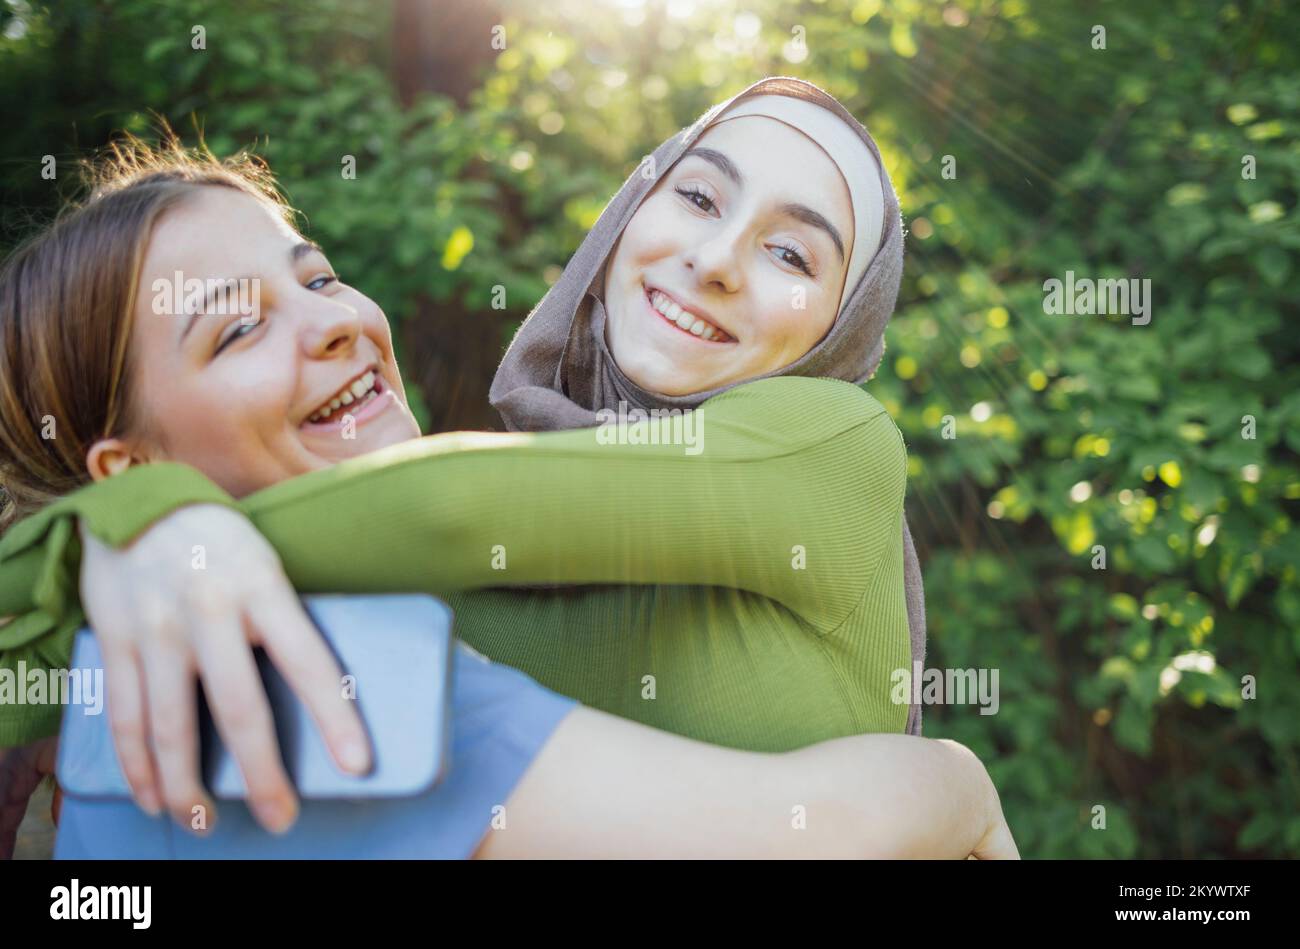 Strong female friendship. Happy two teen girls best friends holding hands and hugging while standing in front of park. Multiethnical friends Stock Photo